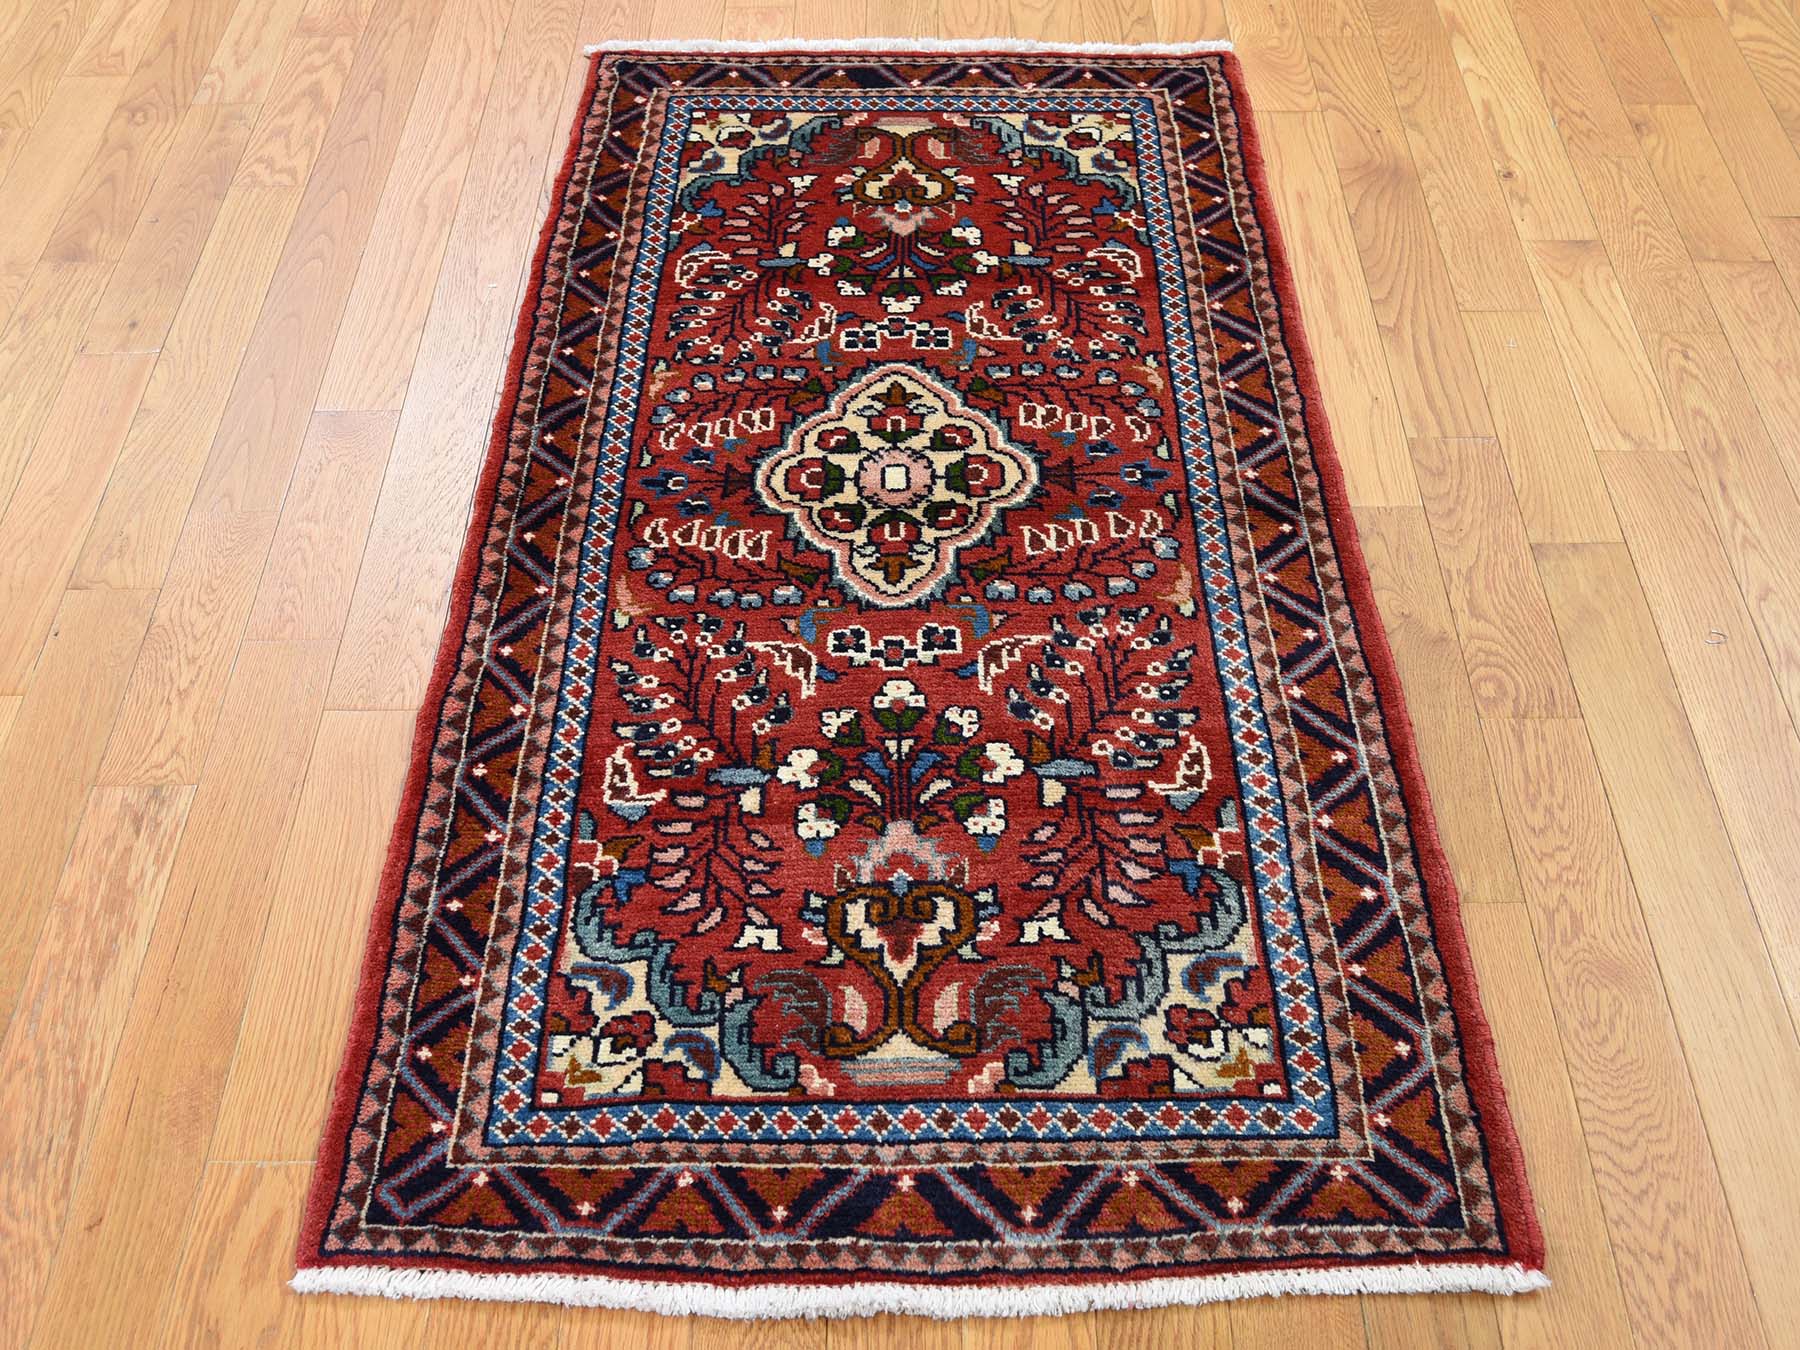 2'7"X4'10" New Persian Lilahan Pure Wool Hand-Knotted Oriental Rug moadb6dc